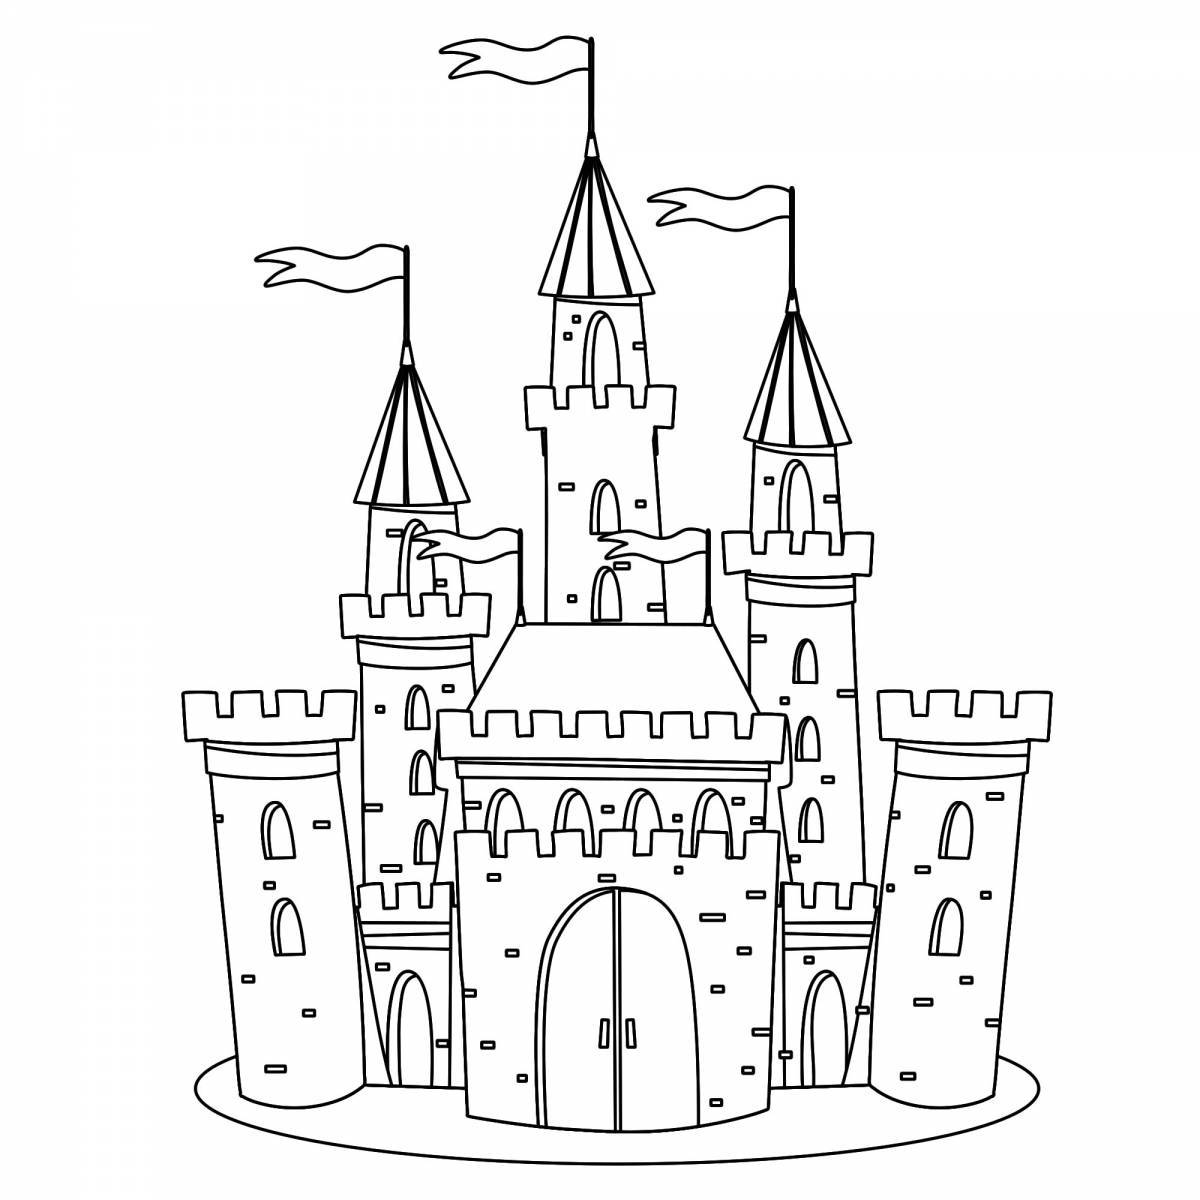 Coloring the royal castle for children